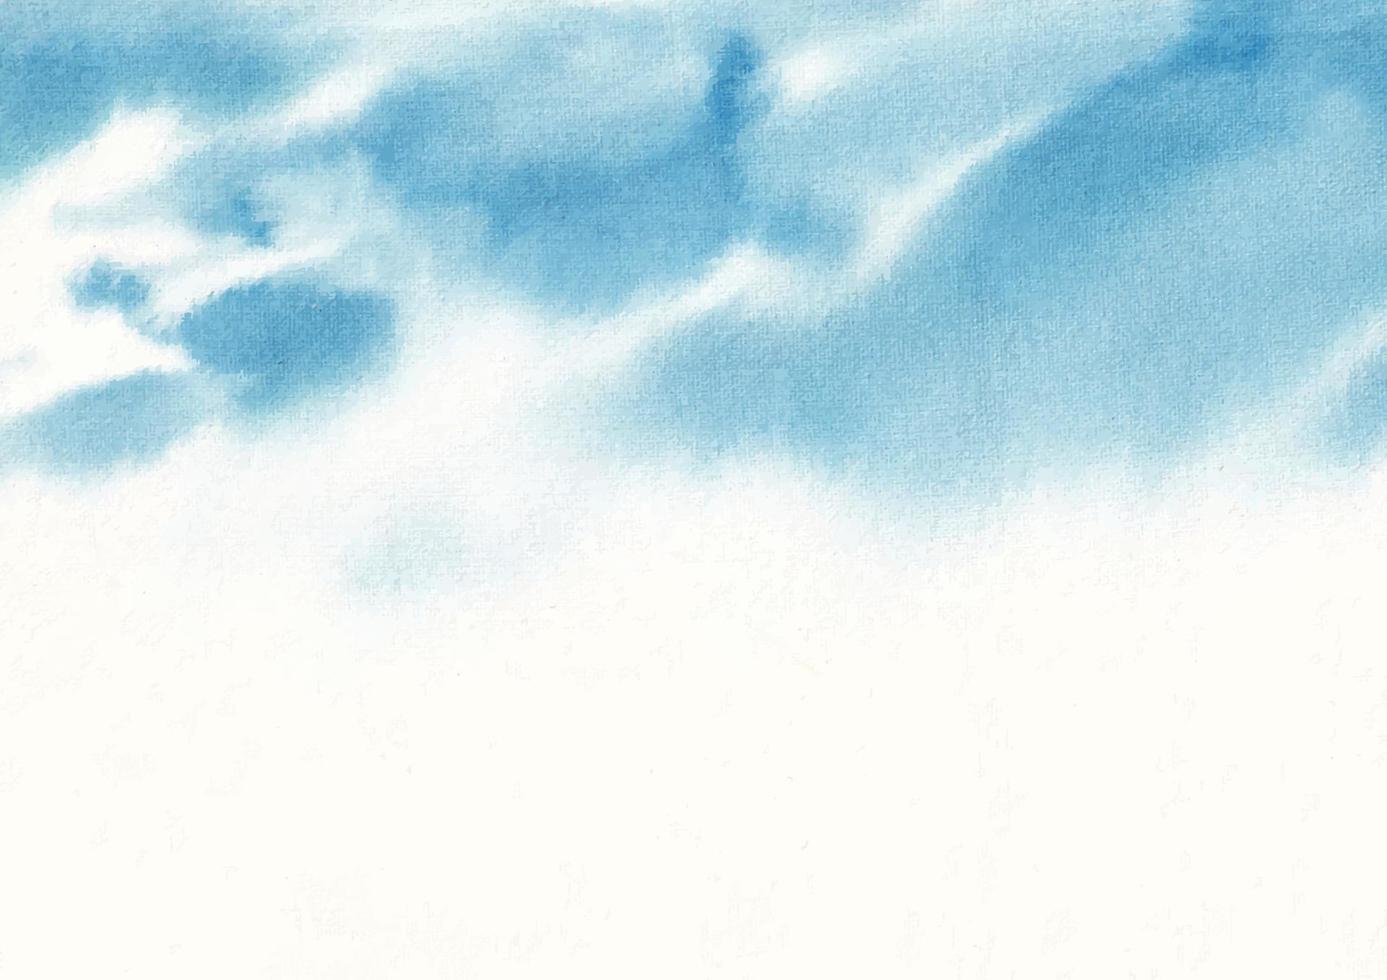 Sky with clouds watercolor art vector